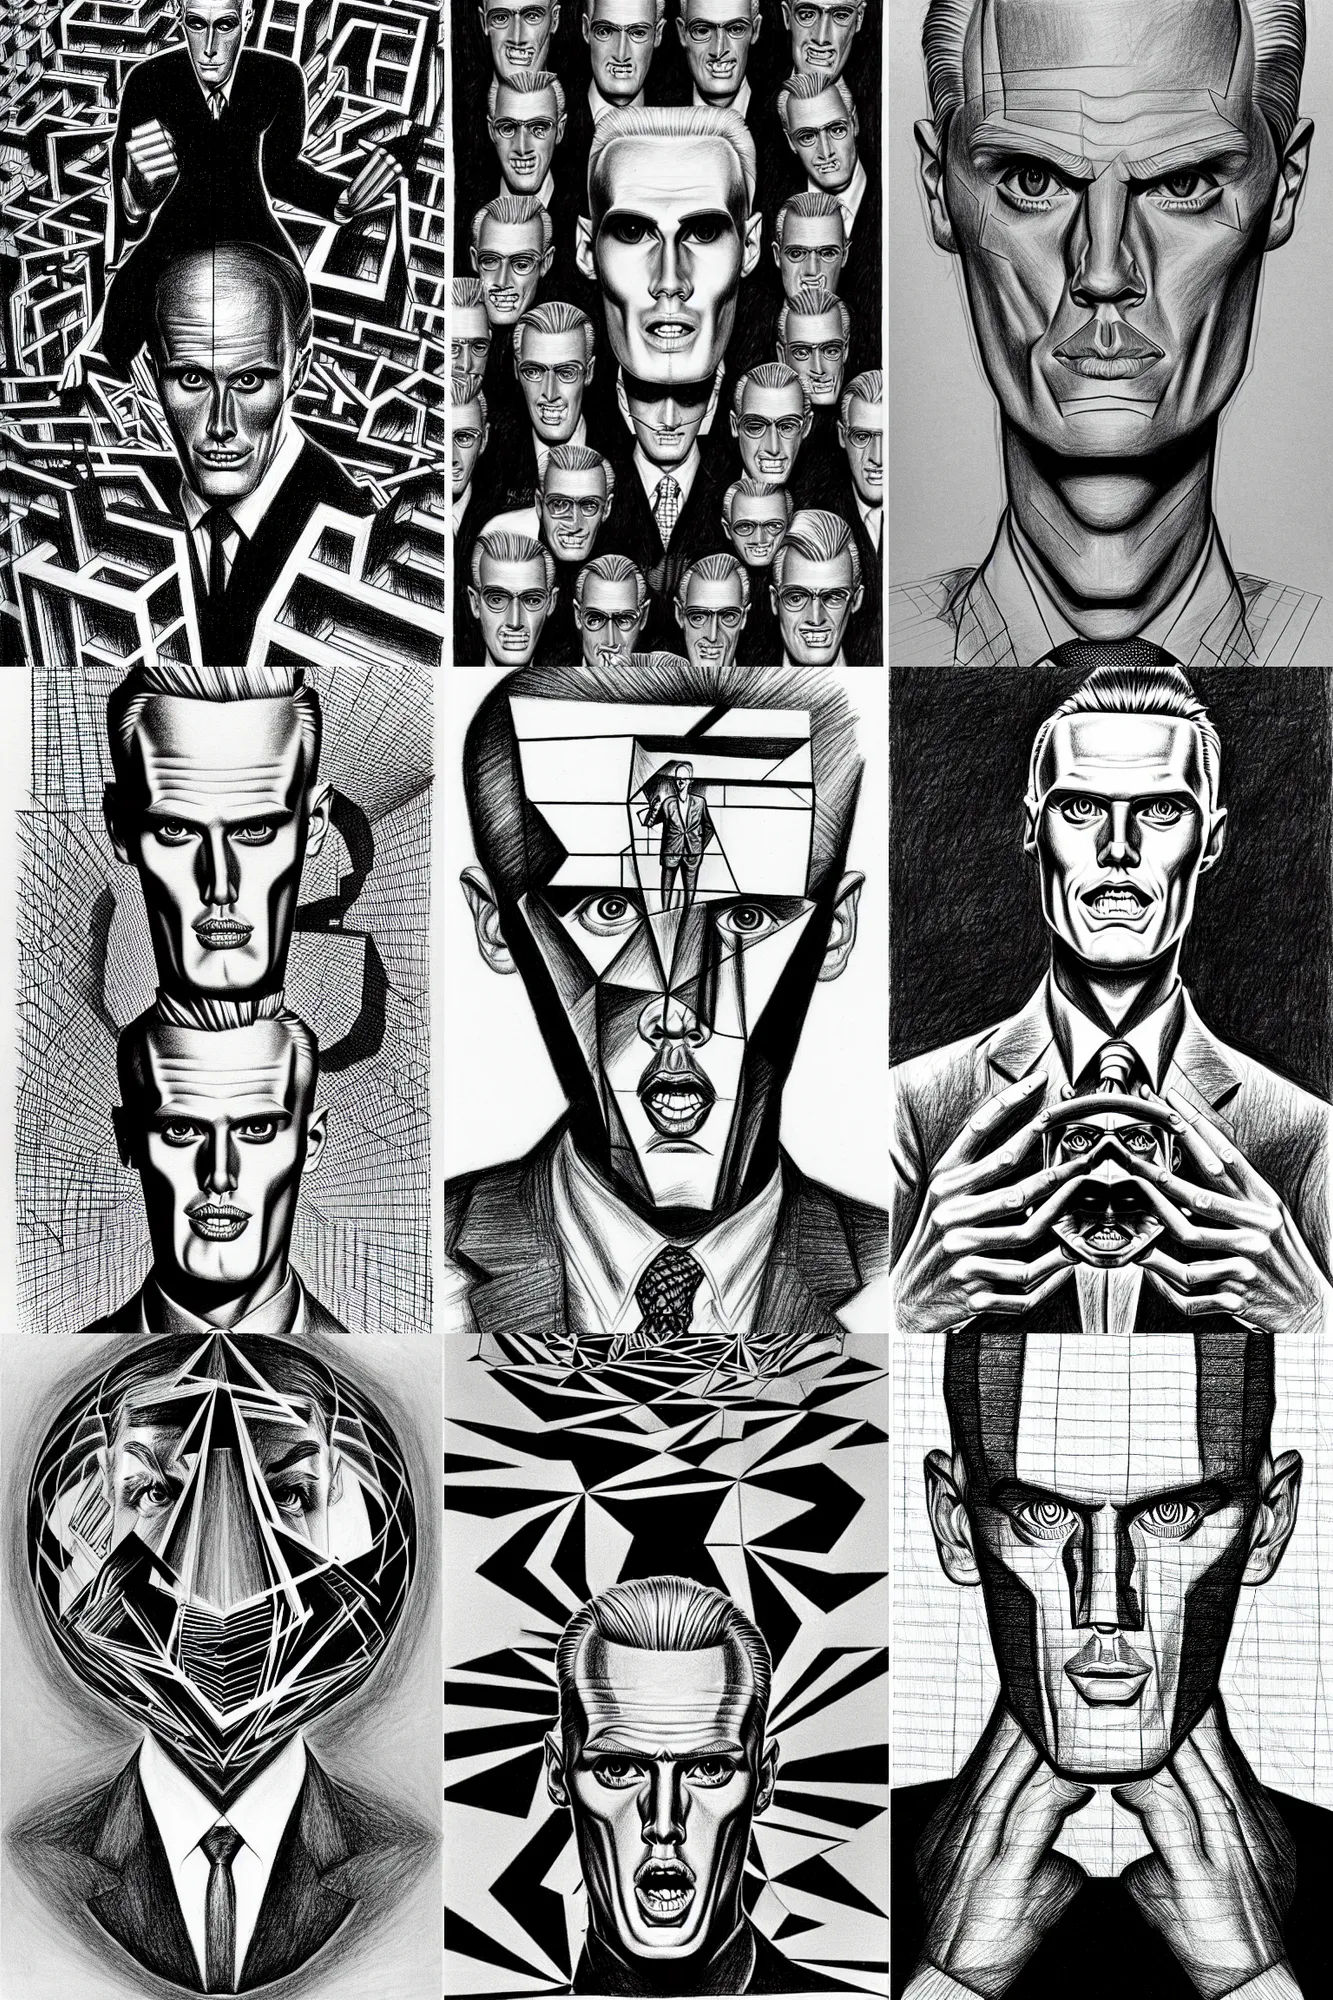 Prompt: recursive mc escher drawing of max headroom drawing max headroom in cyberspace, recursive pencil drawing, very detailed and mathematical